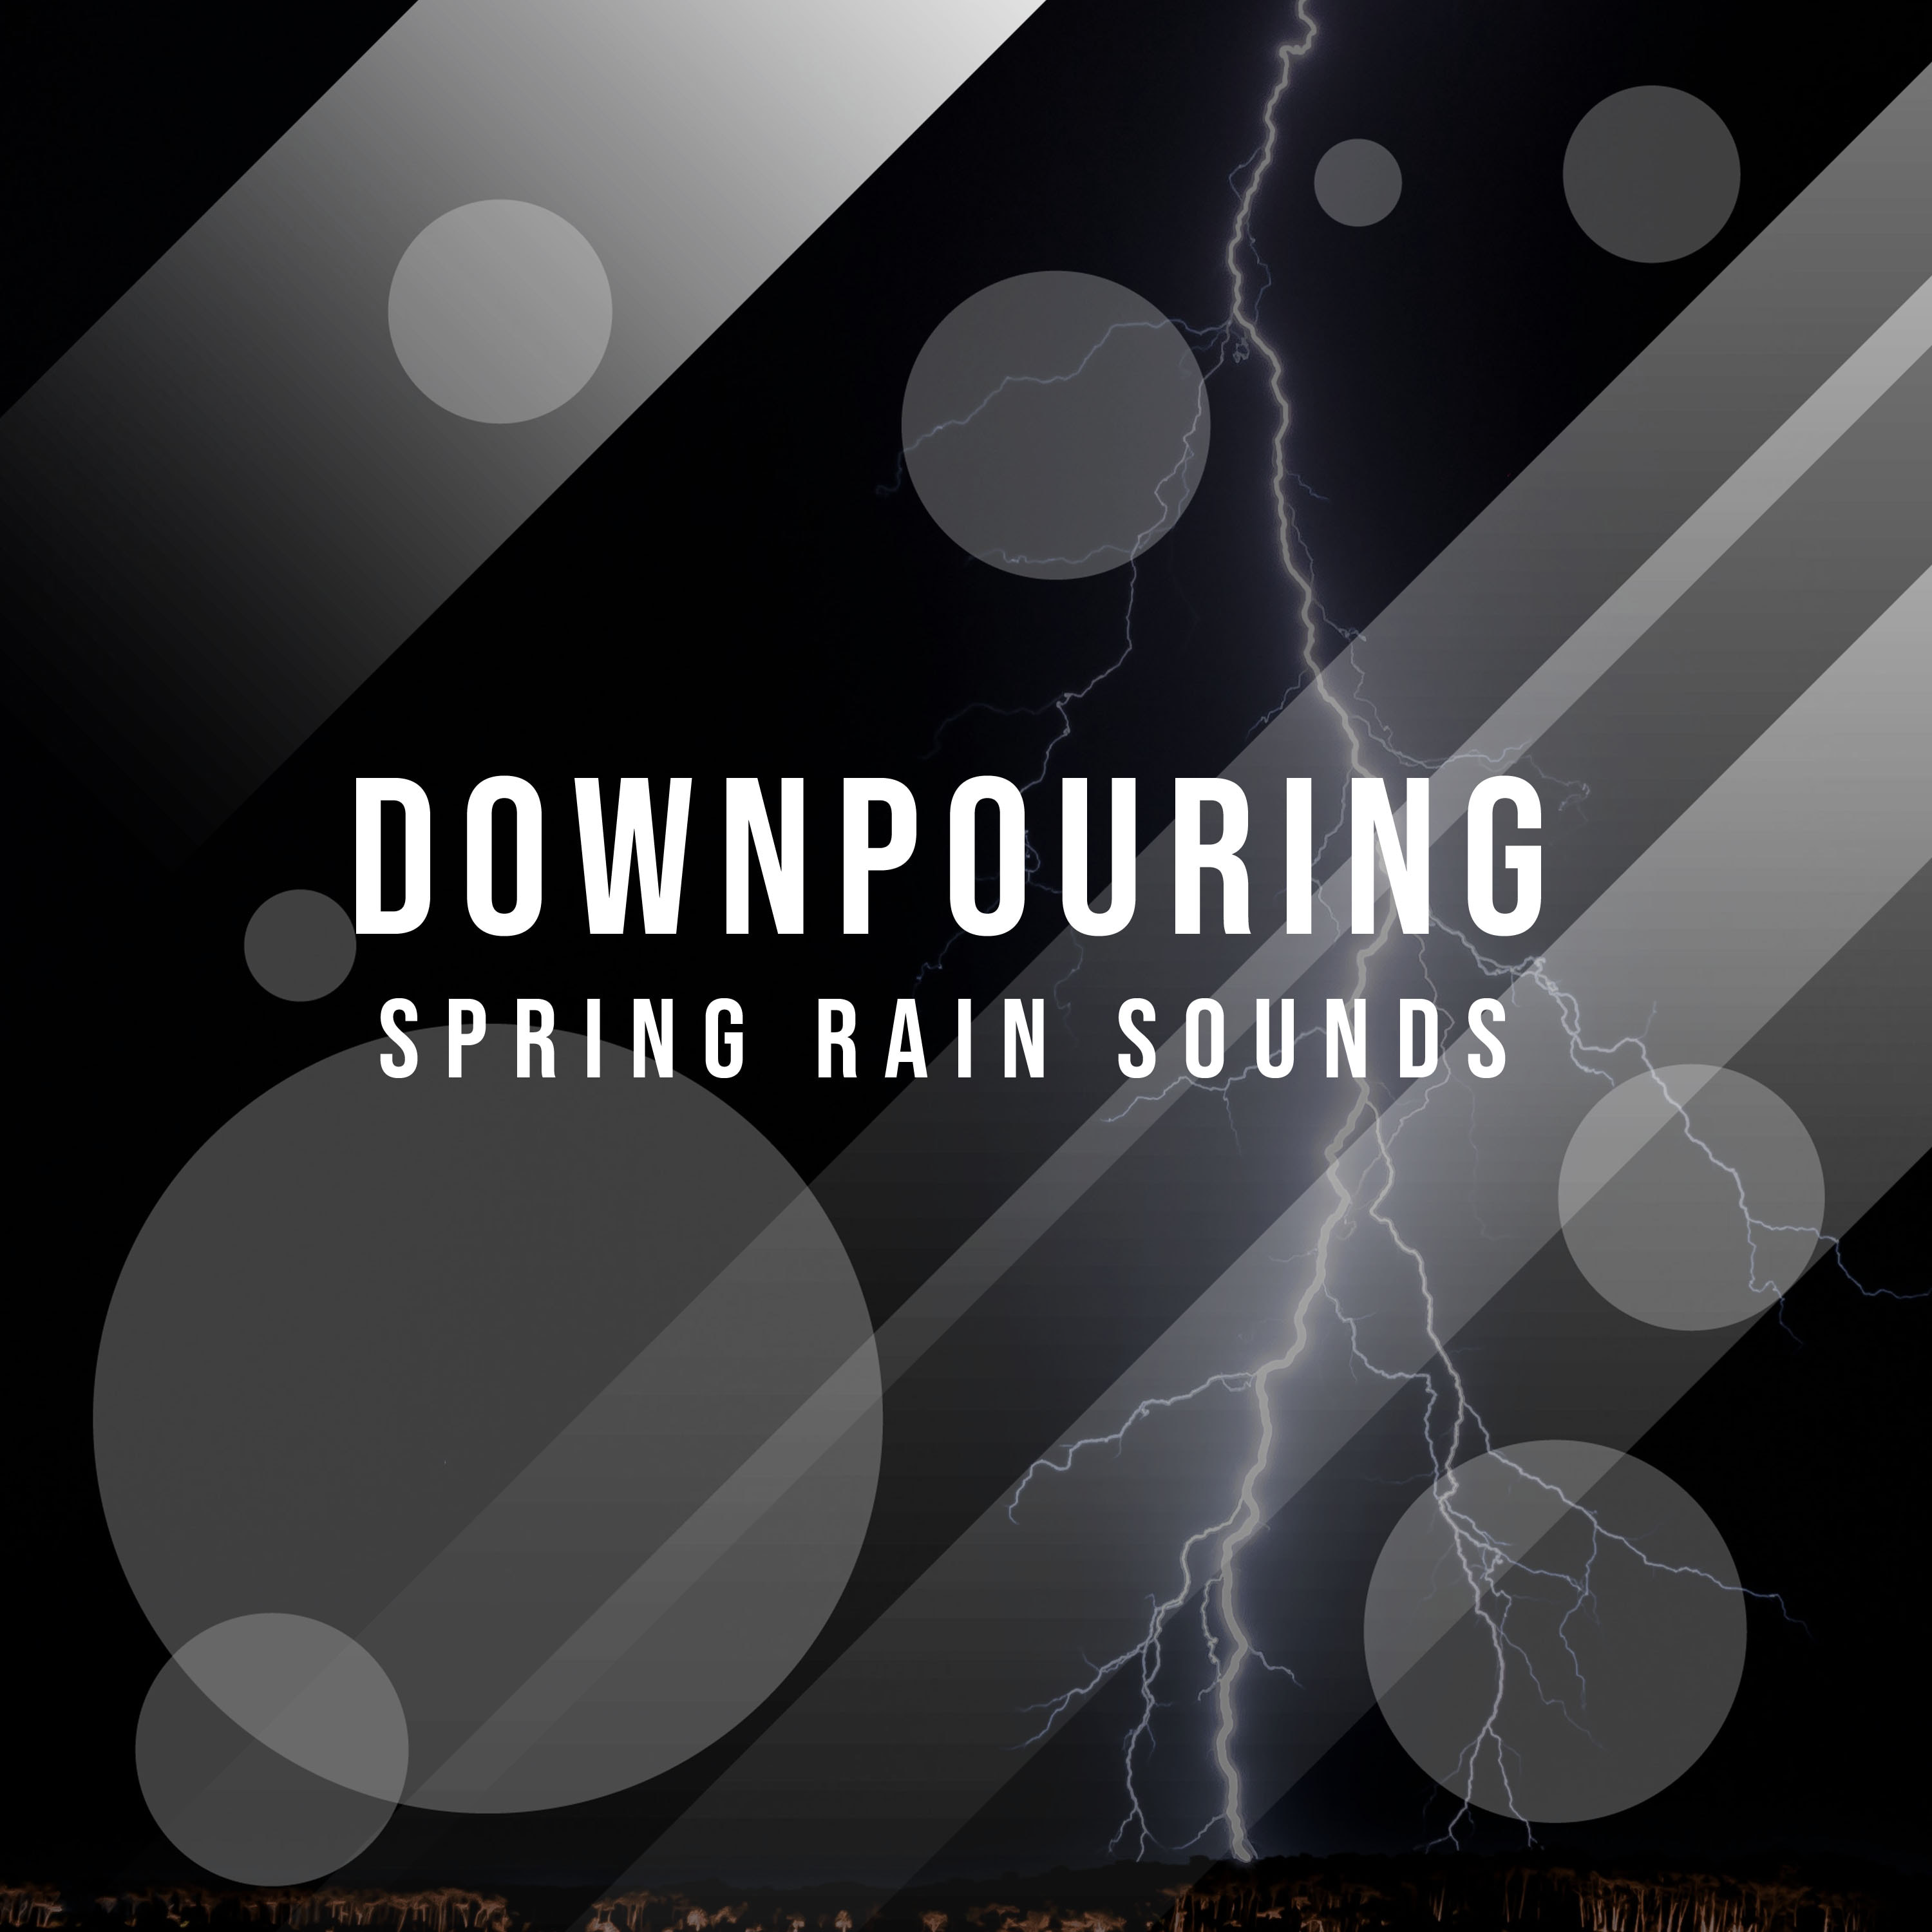 #17 Downpouring Spring Rain Sounds for Sleep